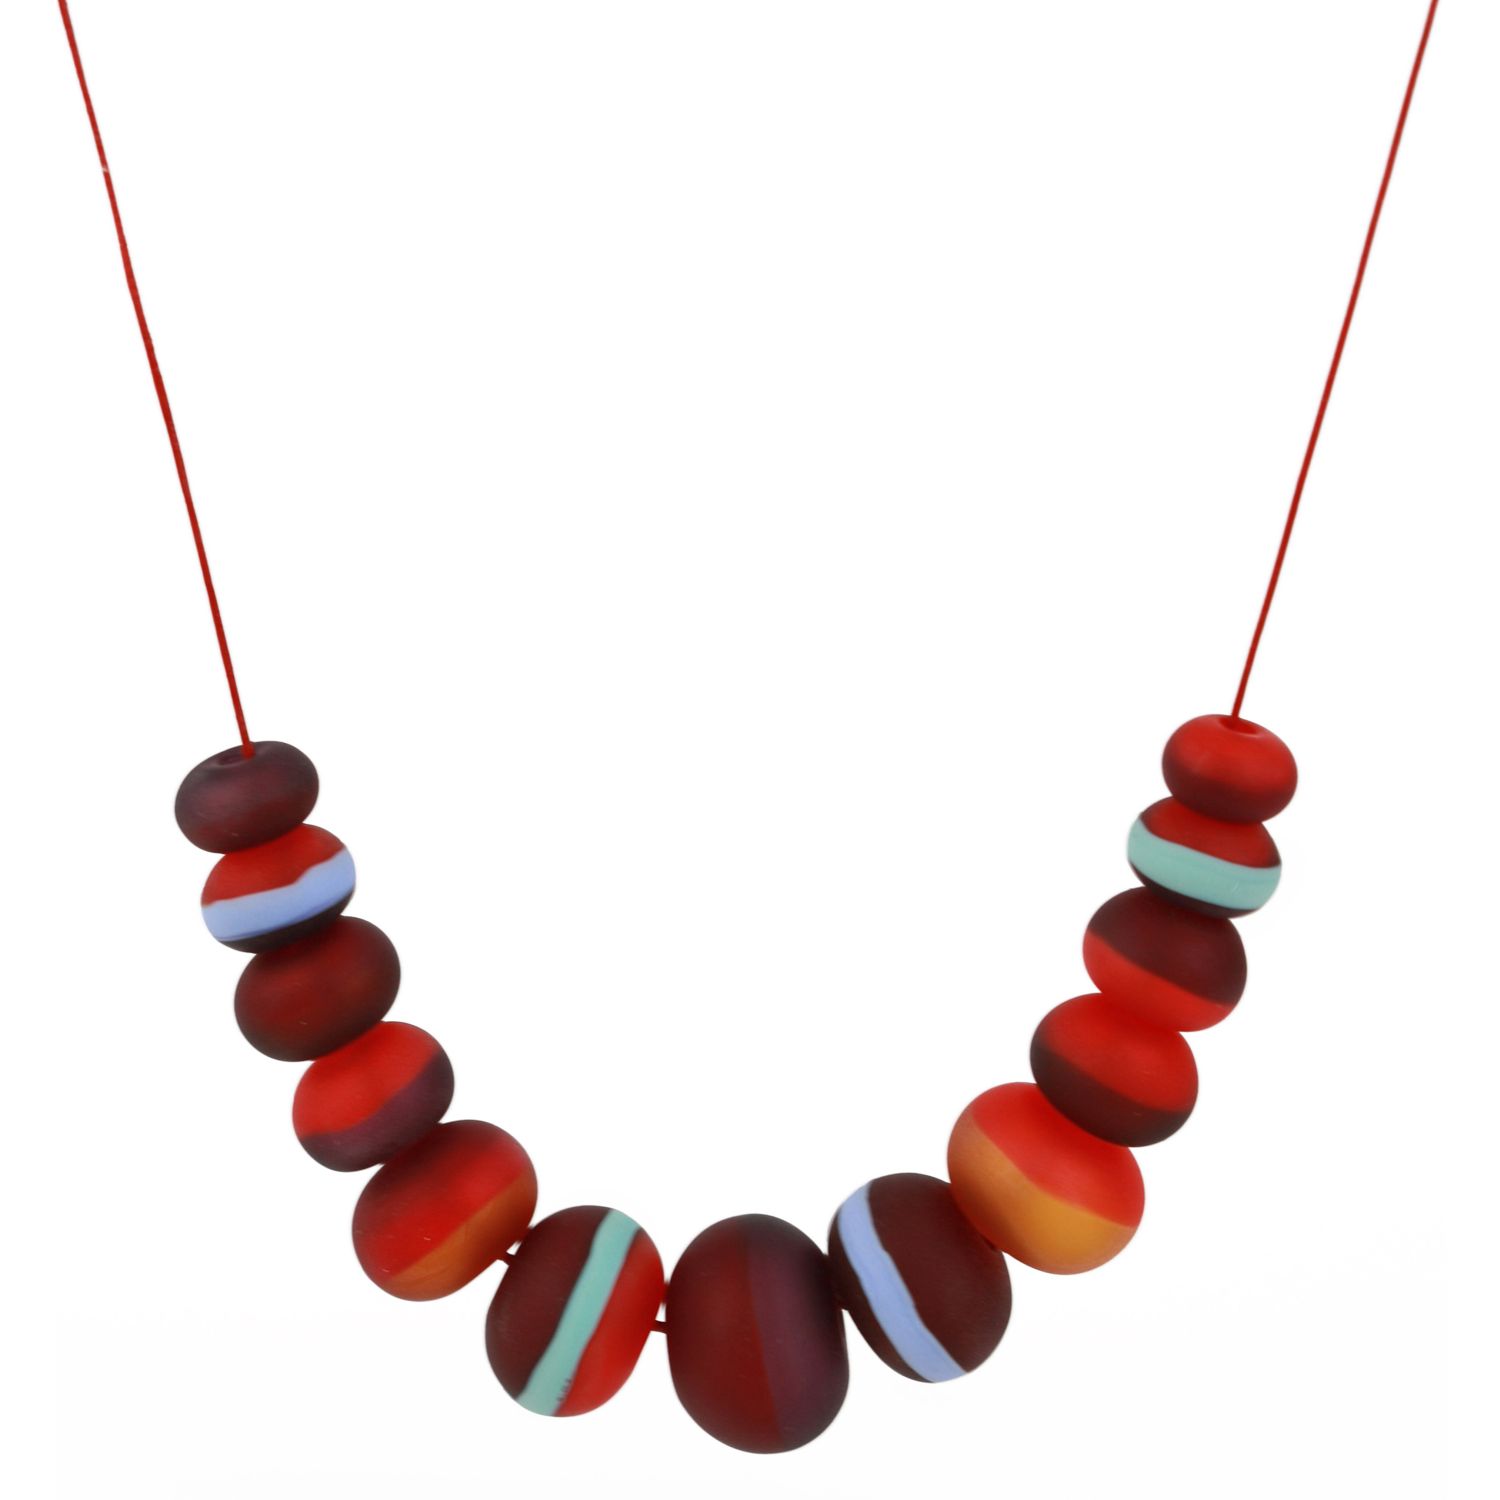 Alicia Niles: Soft Stripe Necklace – Red, Orange & Blue Product Image 3 of 4